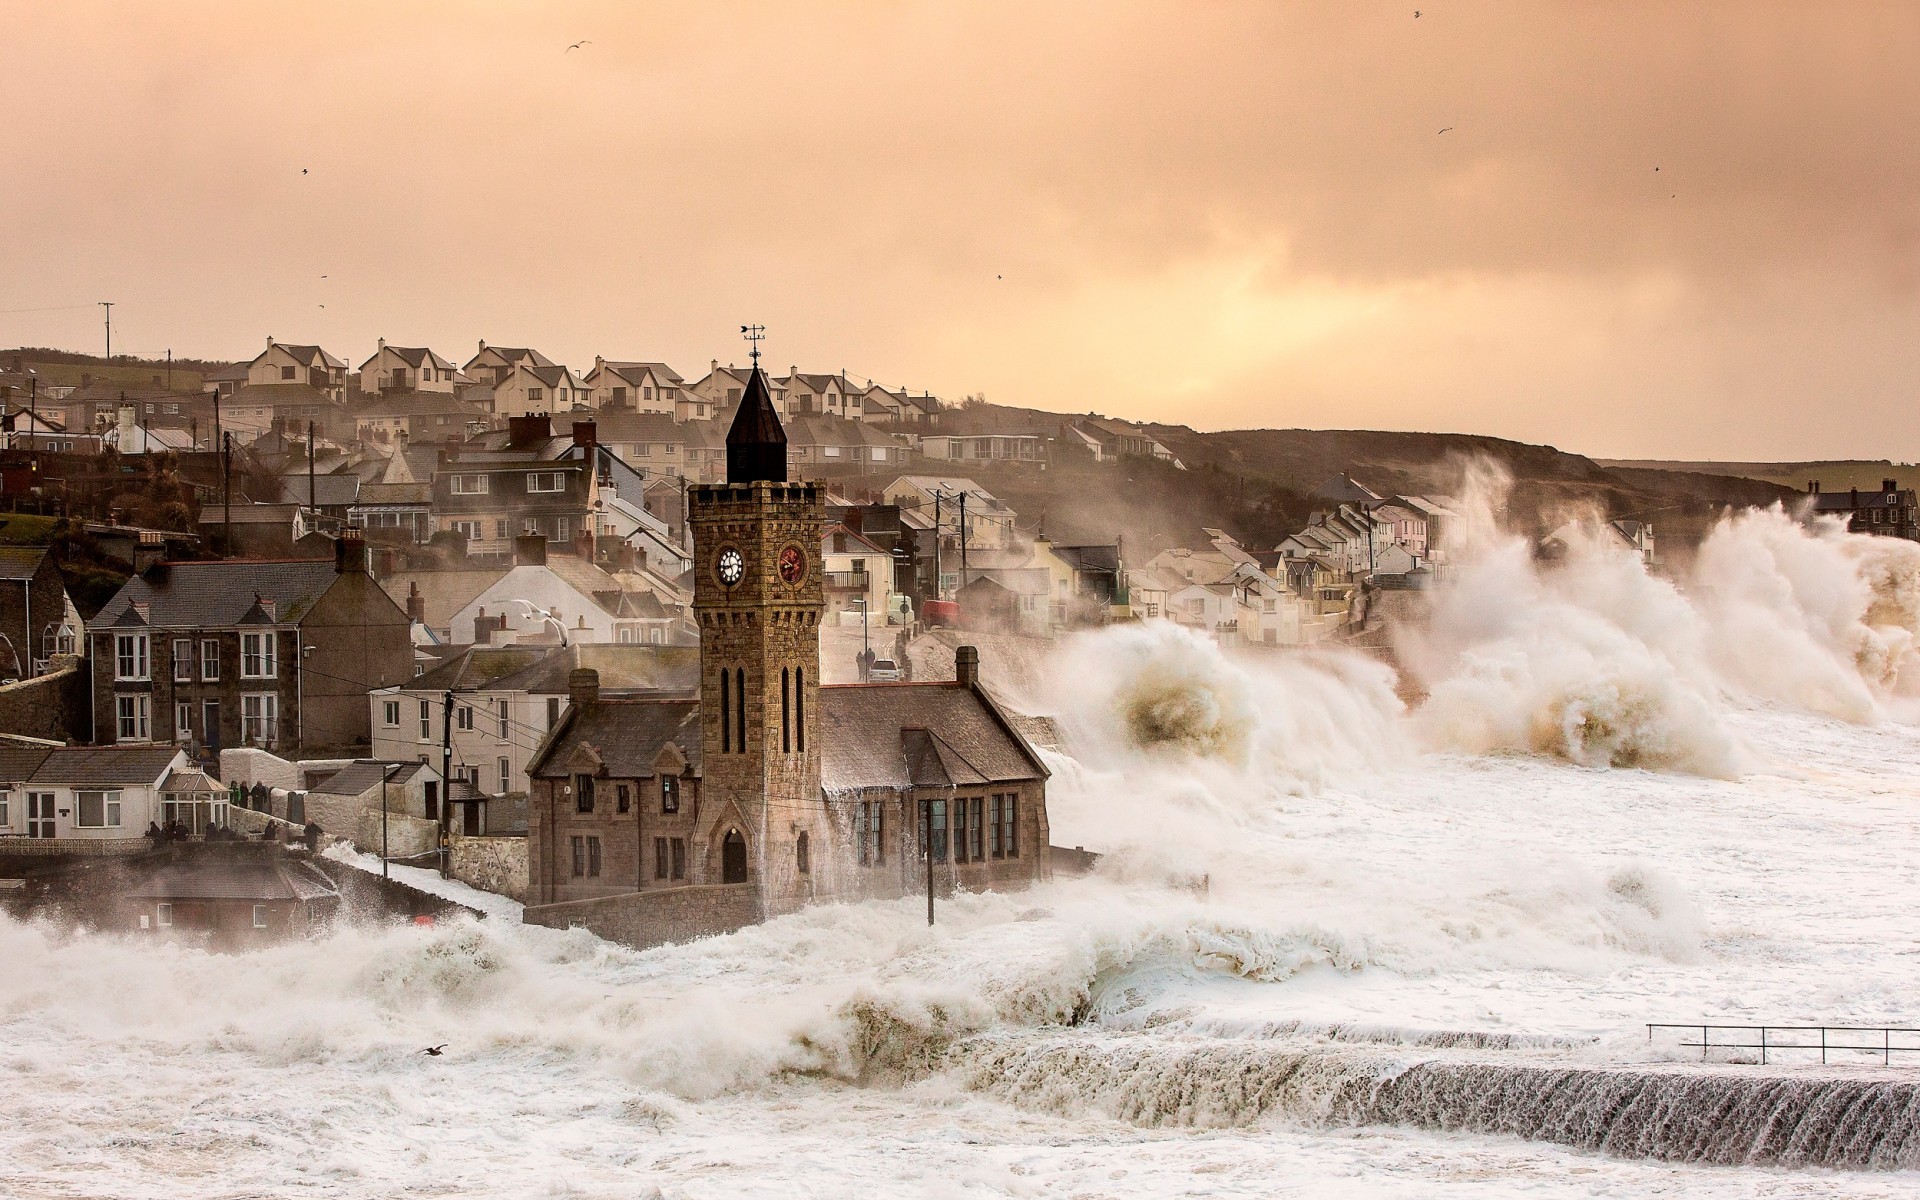 General 1920x1200 building church river town sea storm waves water